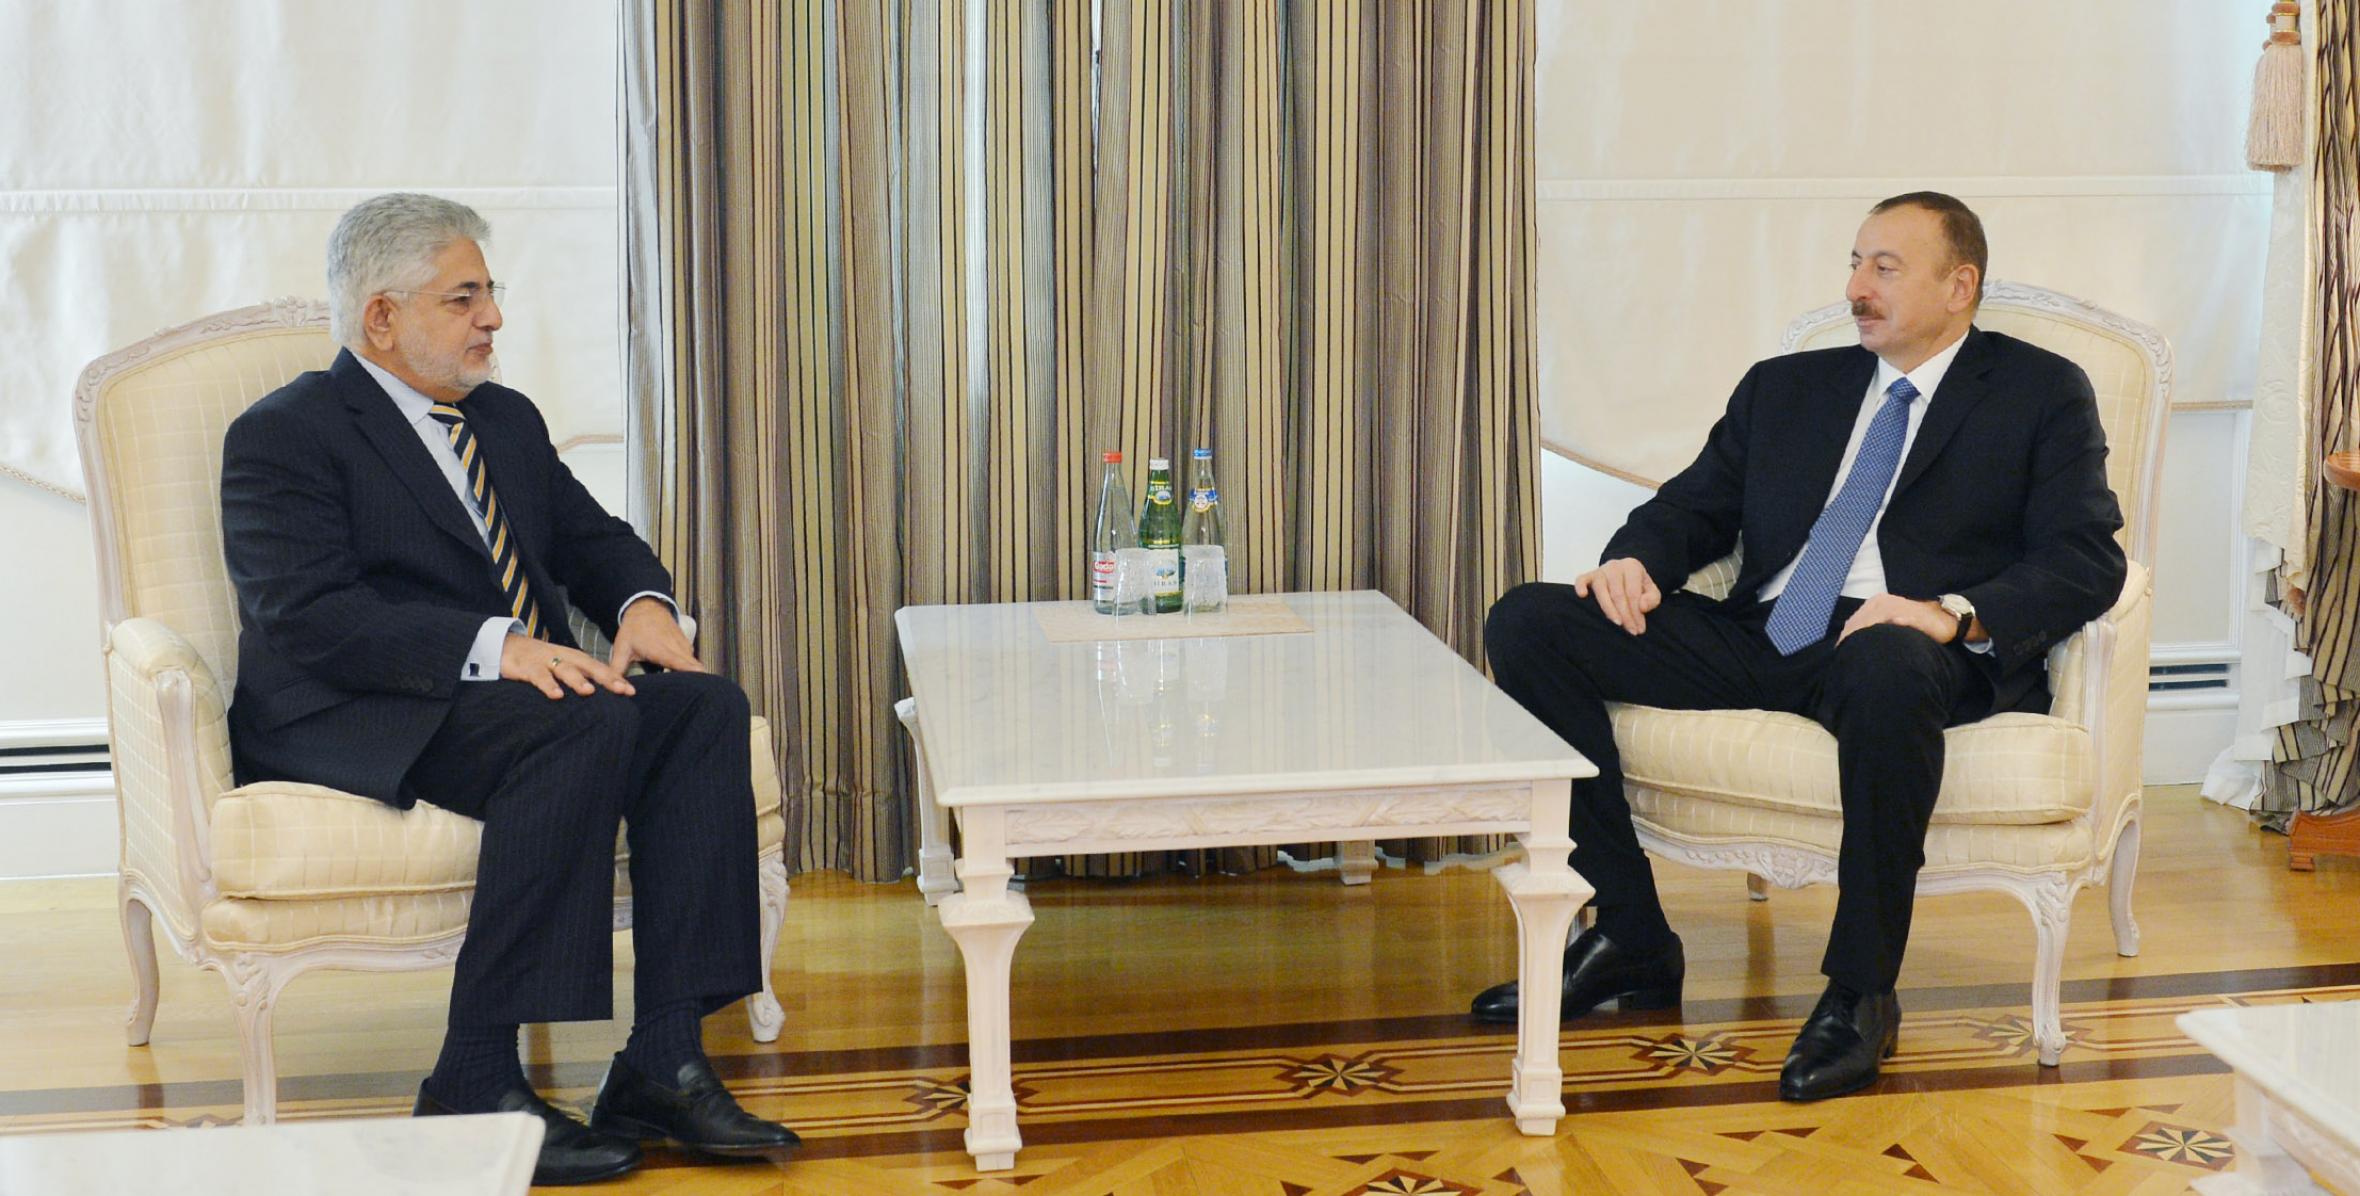 Ilham Aliyev has received the Pakistani Ambassador to Azerbaijan in connection with the completion of his diplomatic mission